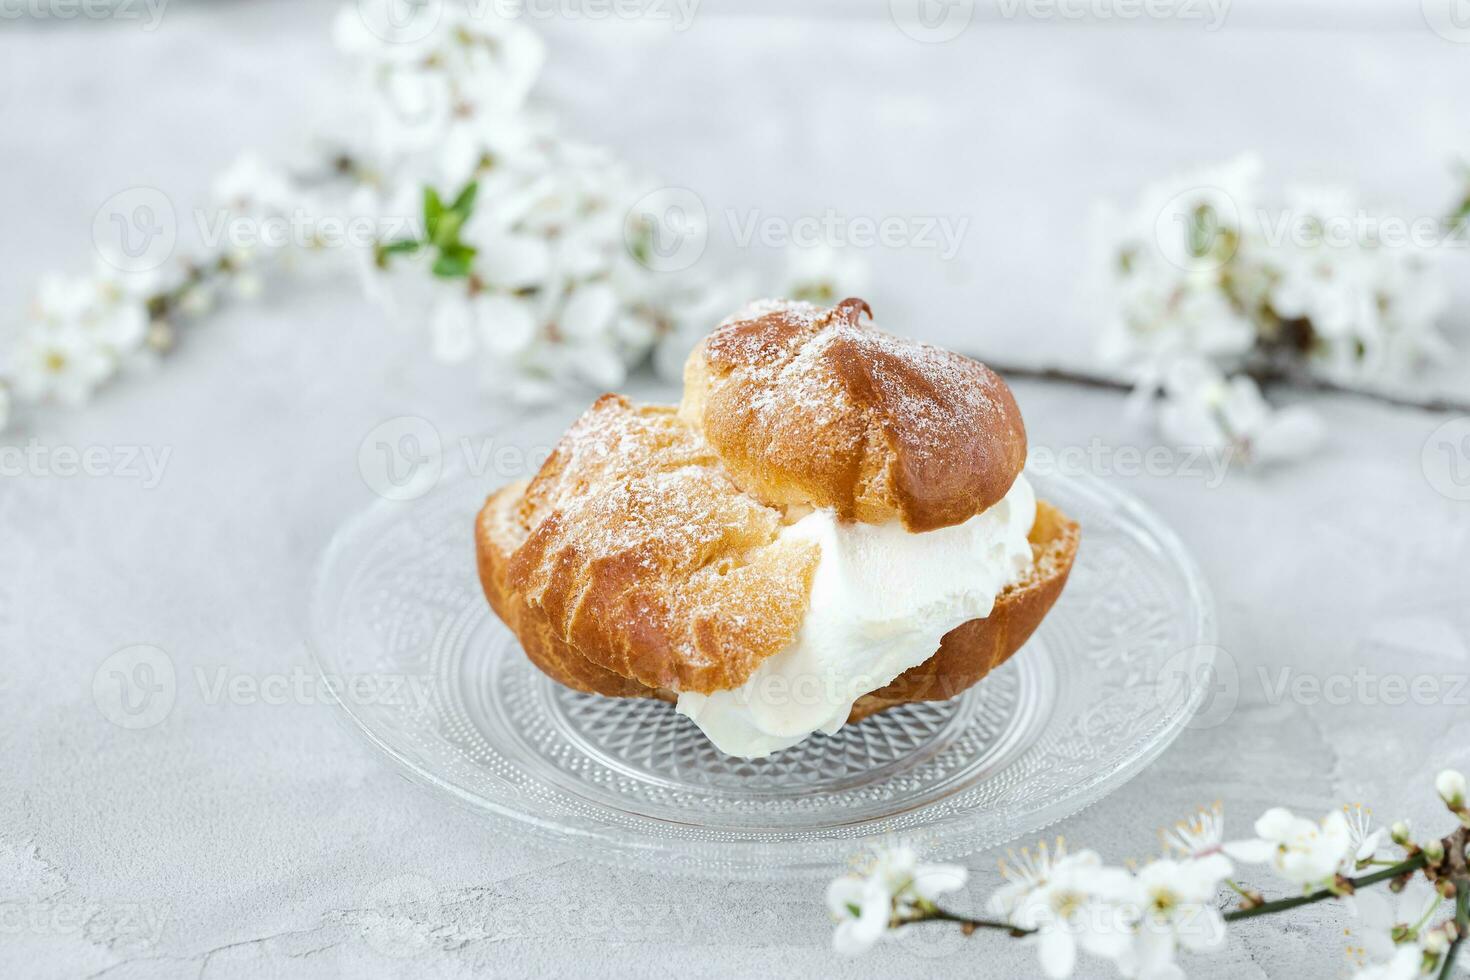 Choux Bun with whipped cream and sugar powder on top. Choux pastry dessert. French cream puff photo